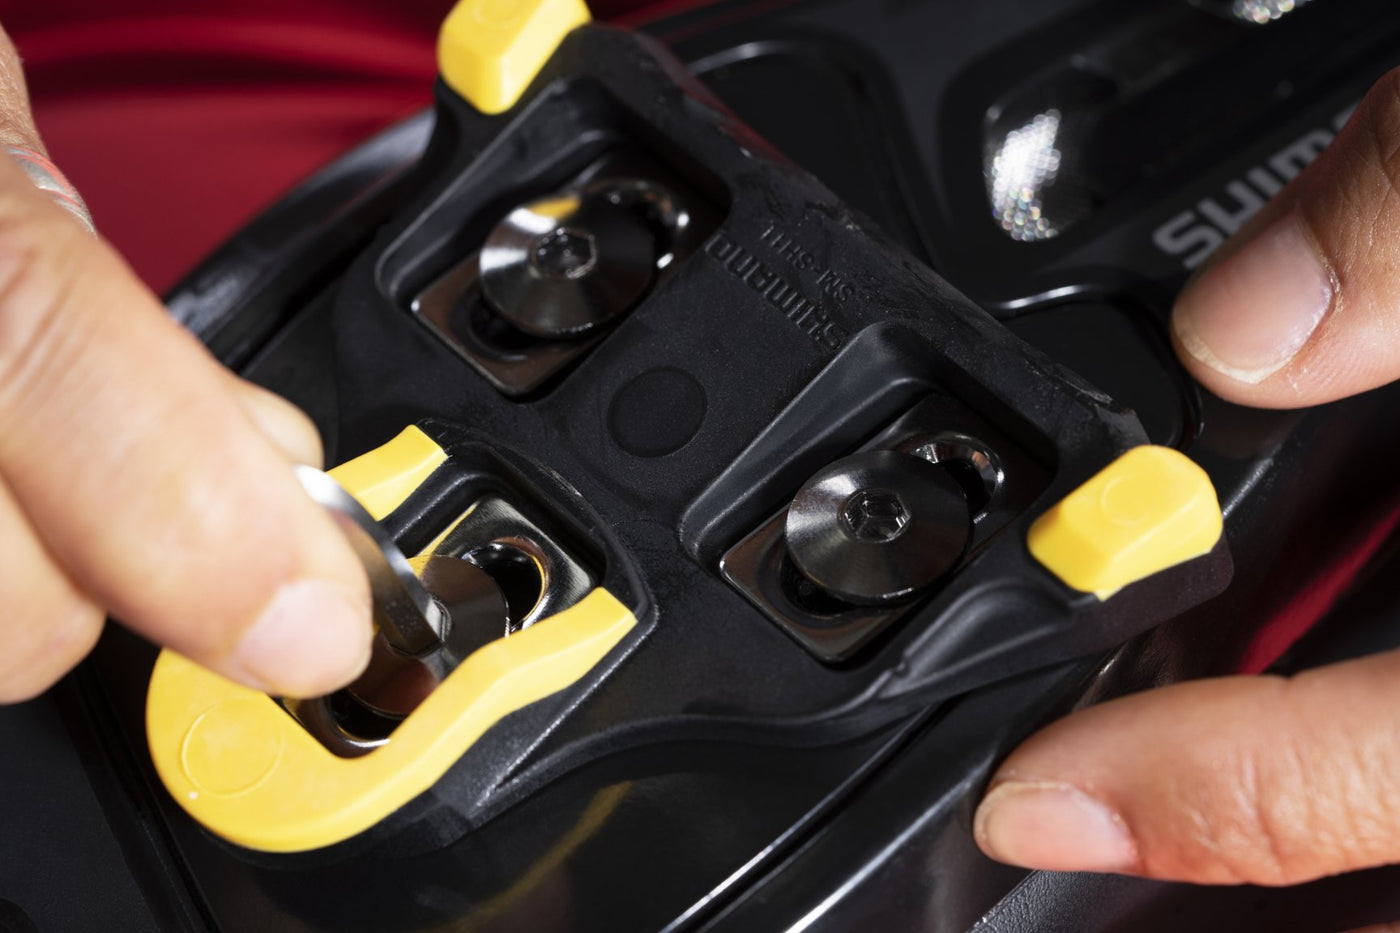 How to install SPD-SL / 3-hole cleats